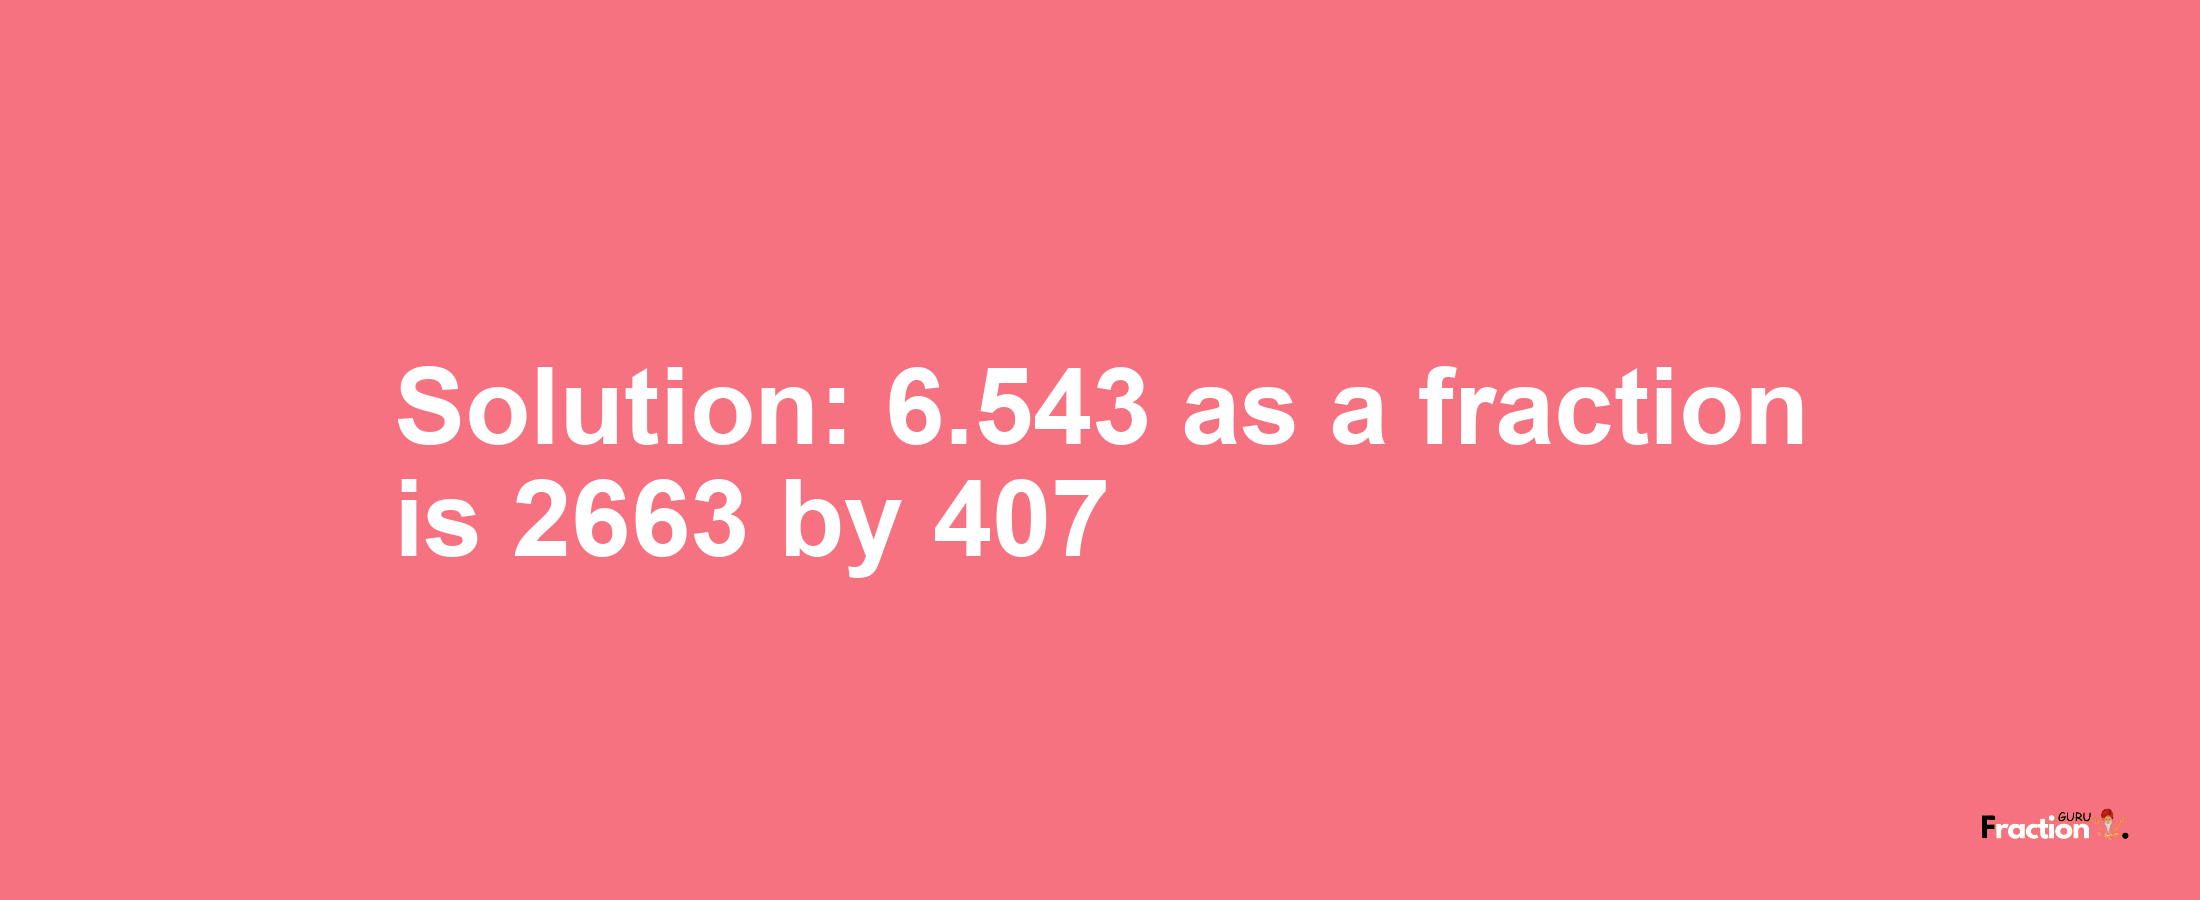 Solution:6.543 as a fraction is 2663/407